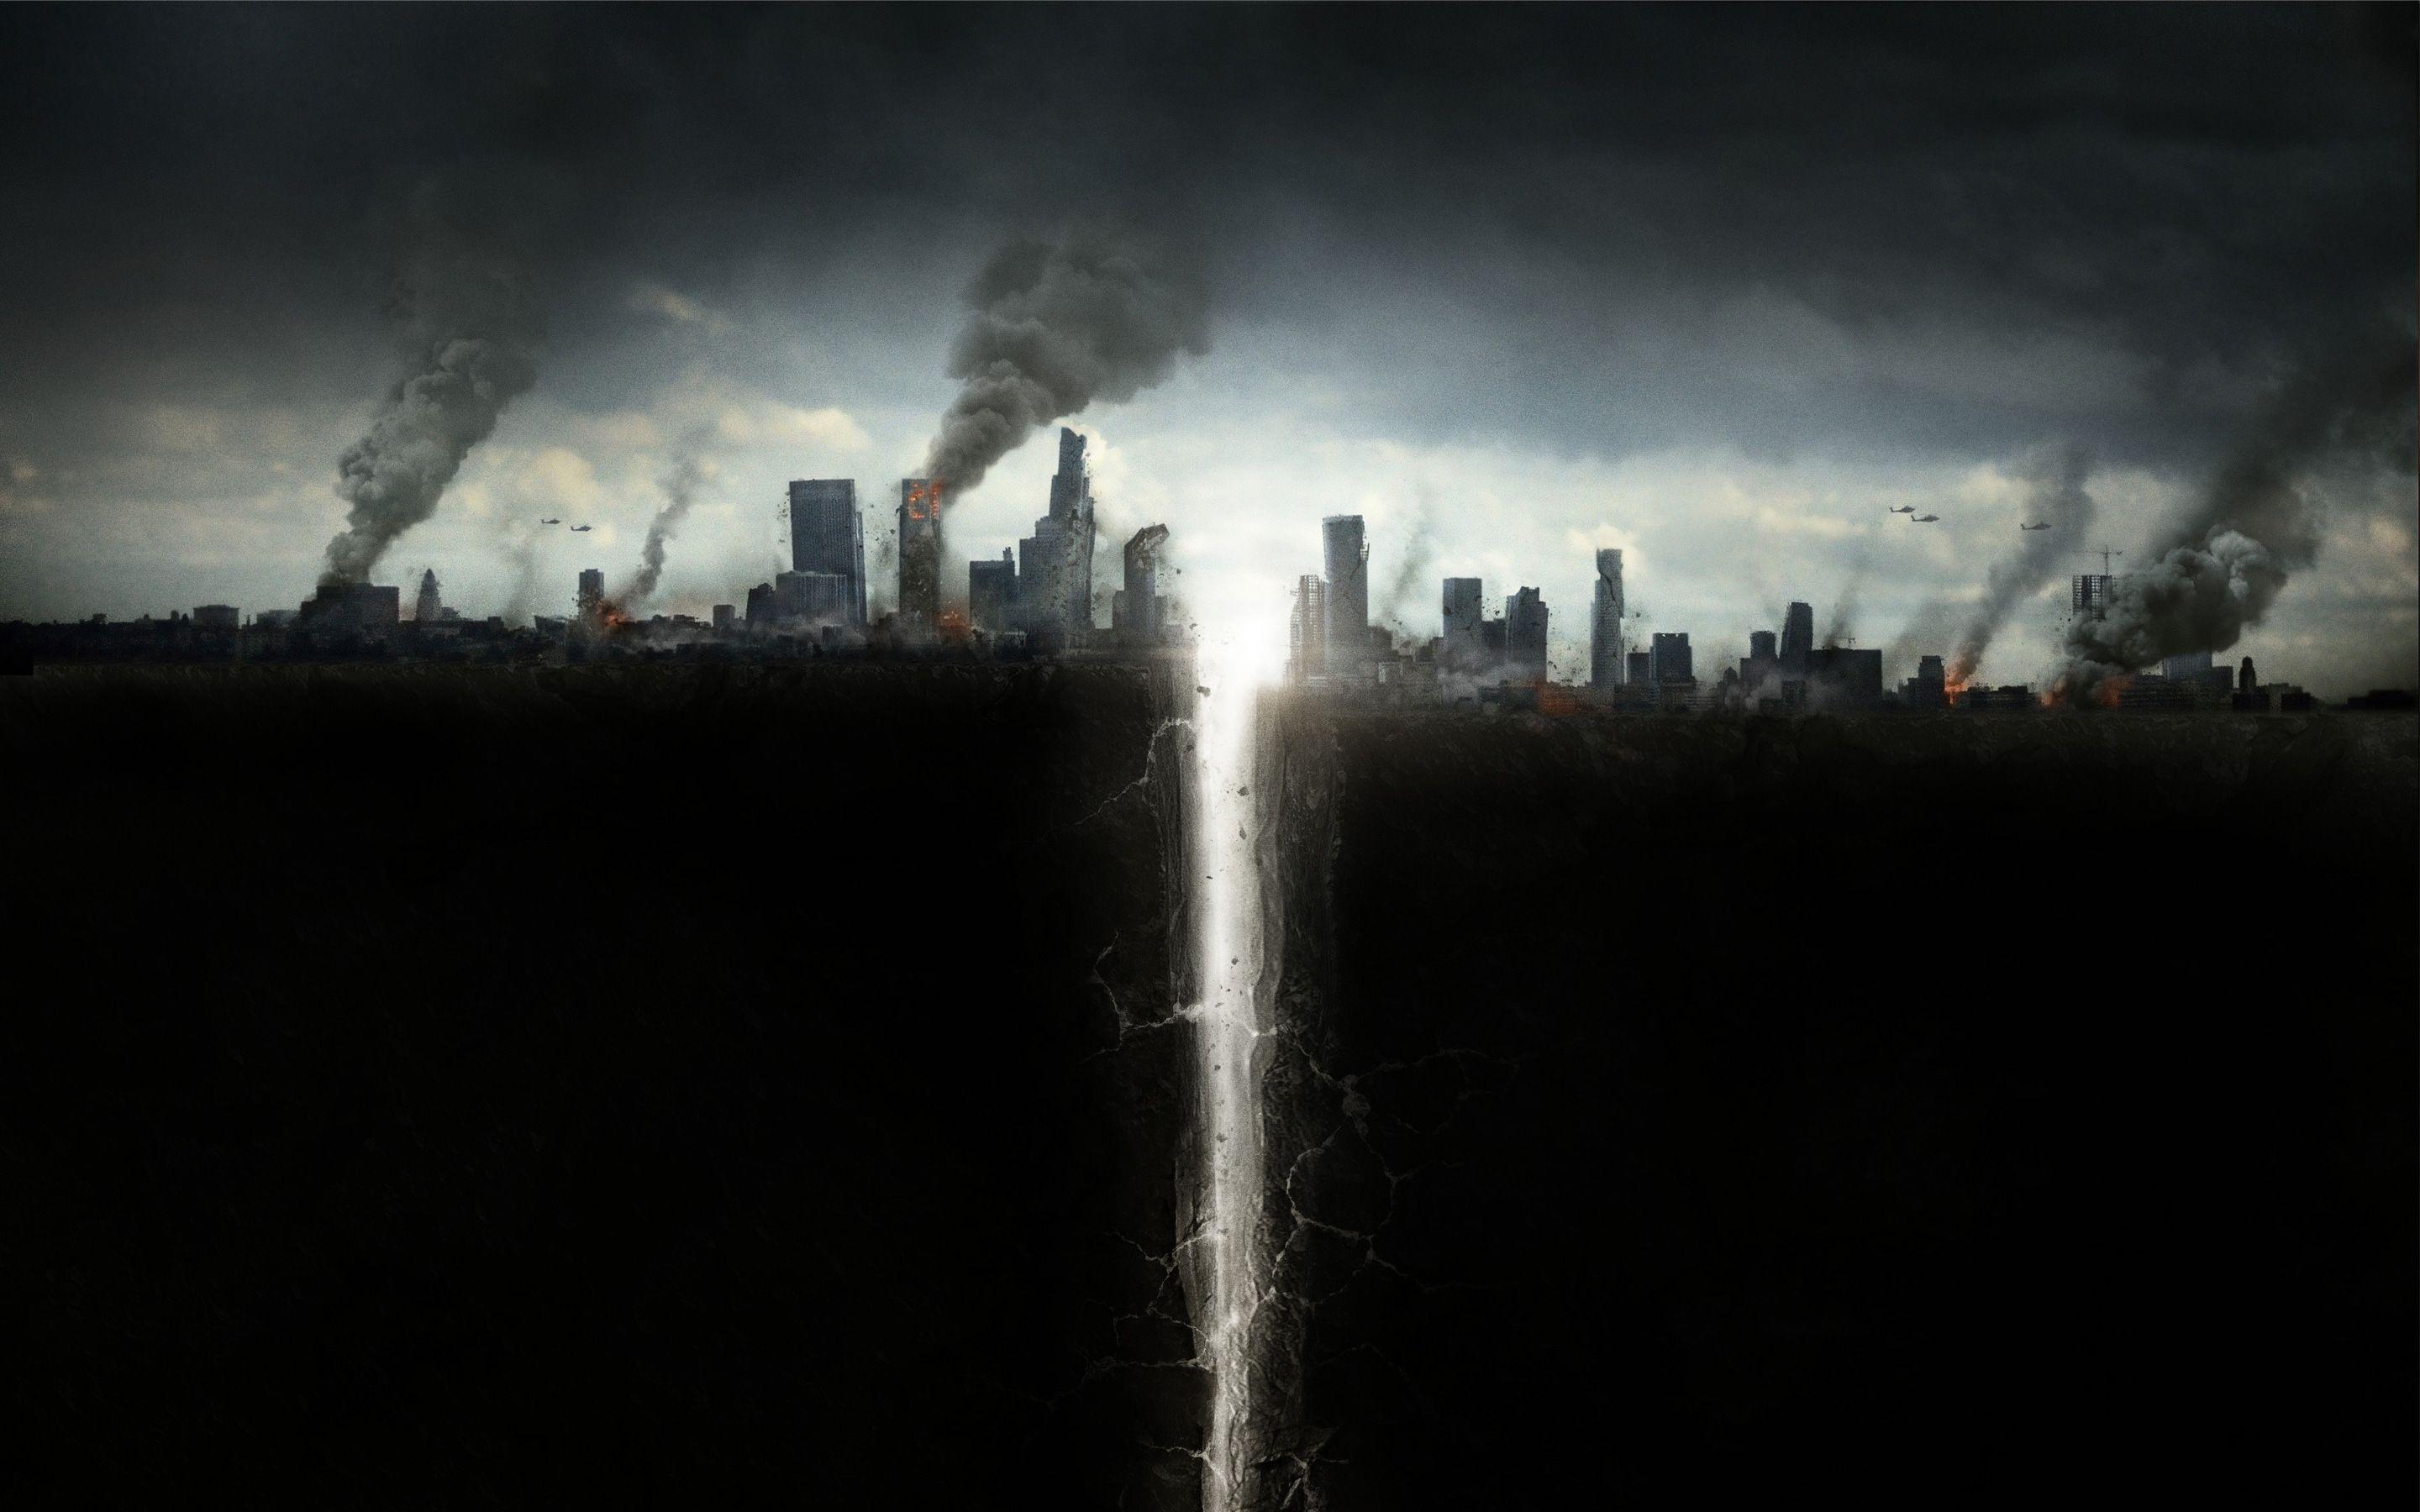 San Andreas Fault Burning Skyscrapers Wallpaper and Free